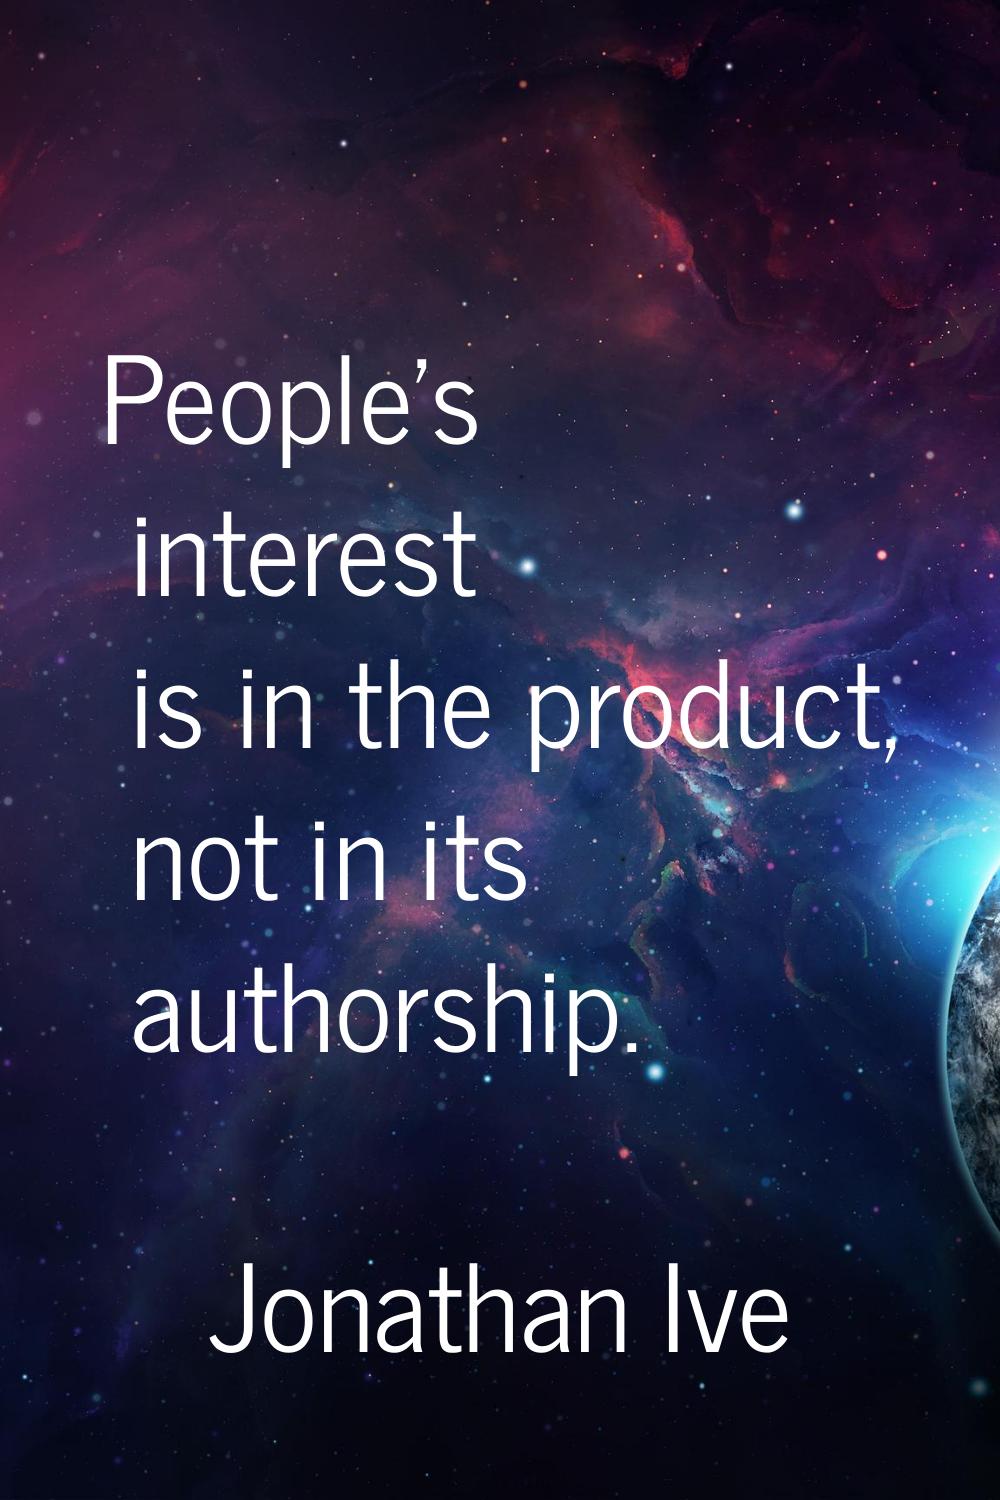 People's interest is in the product, not in its authorship.